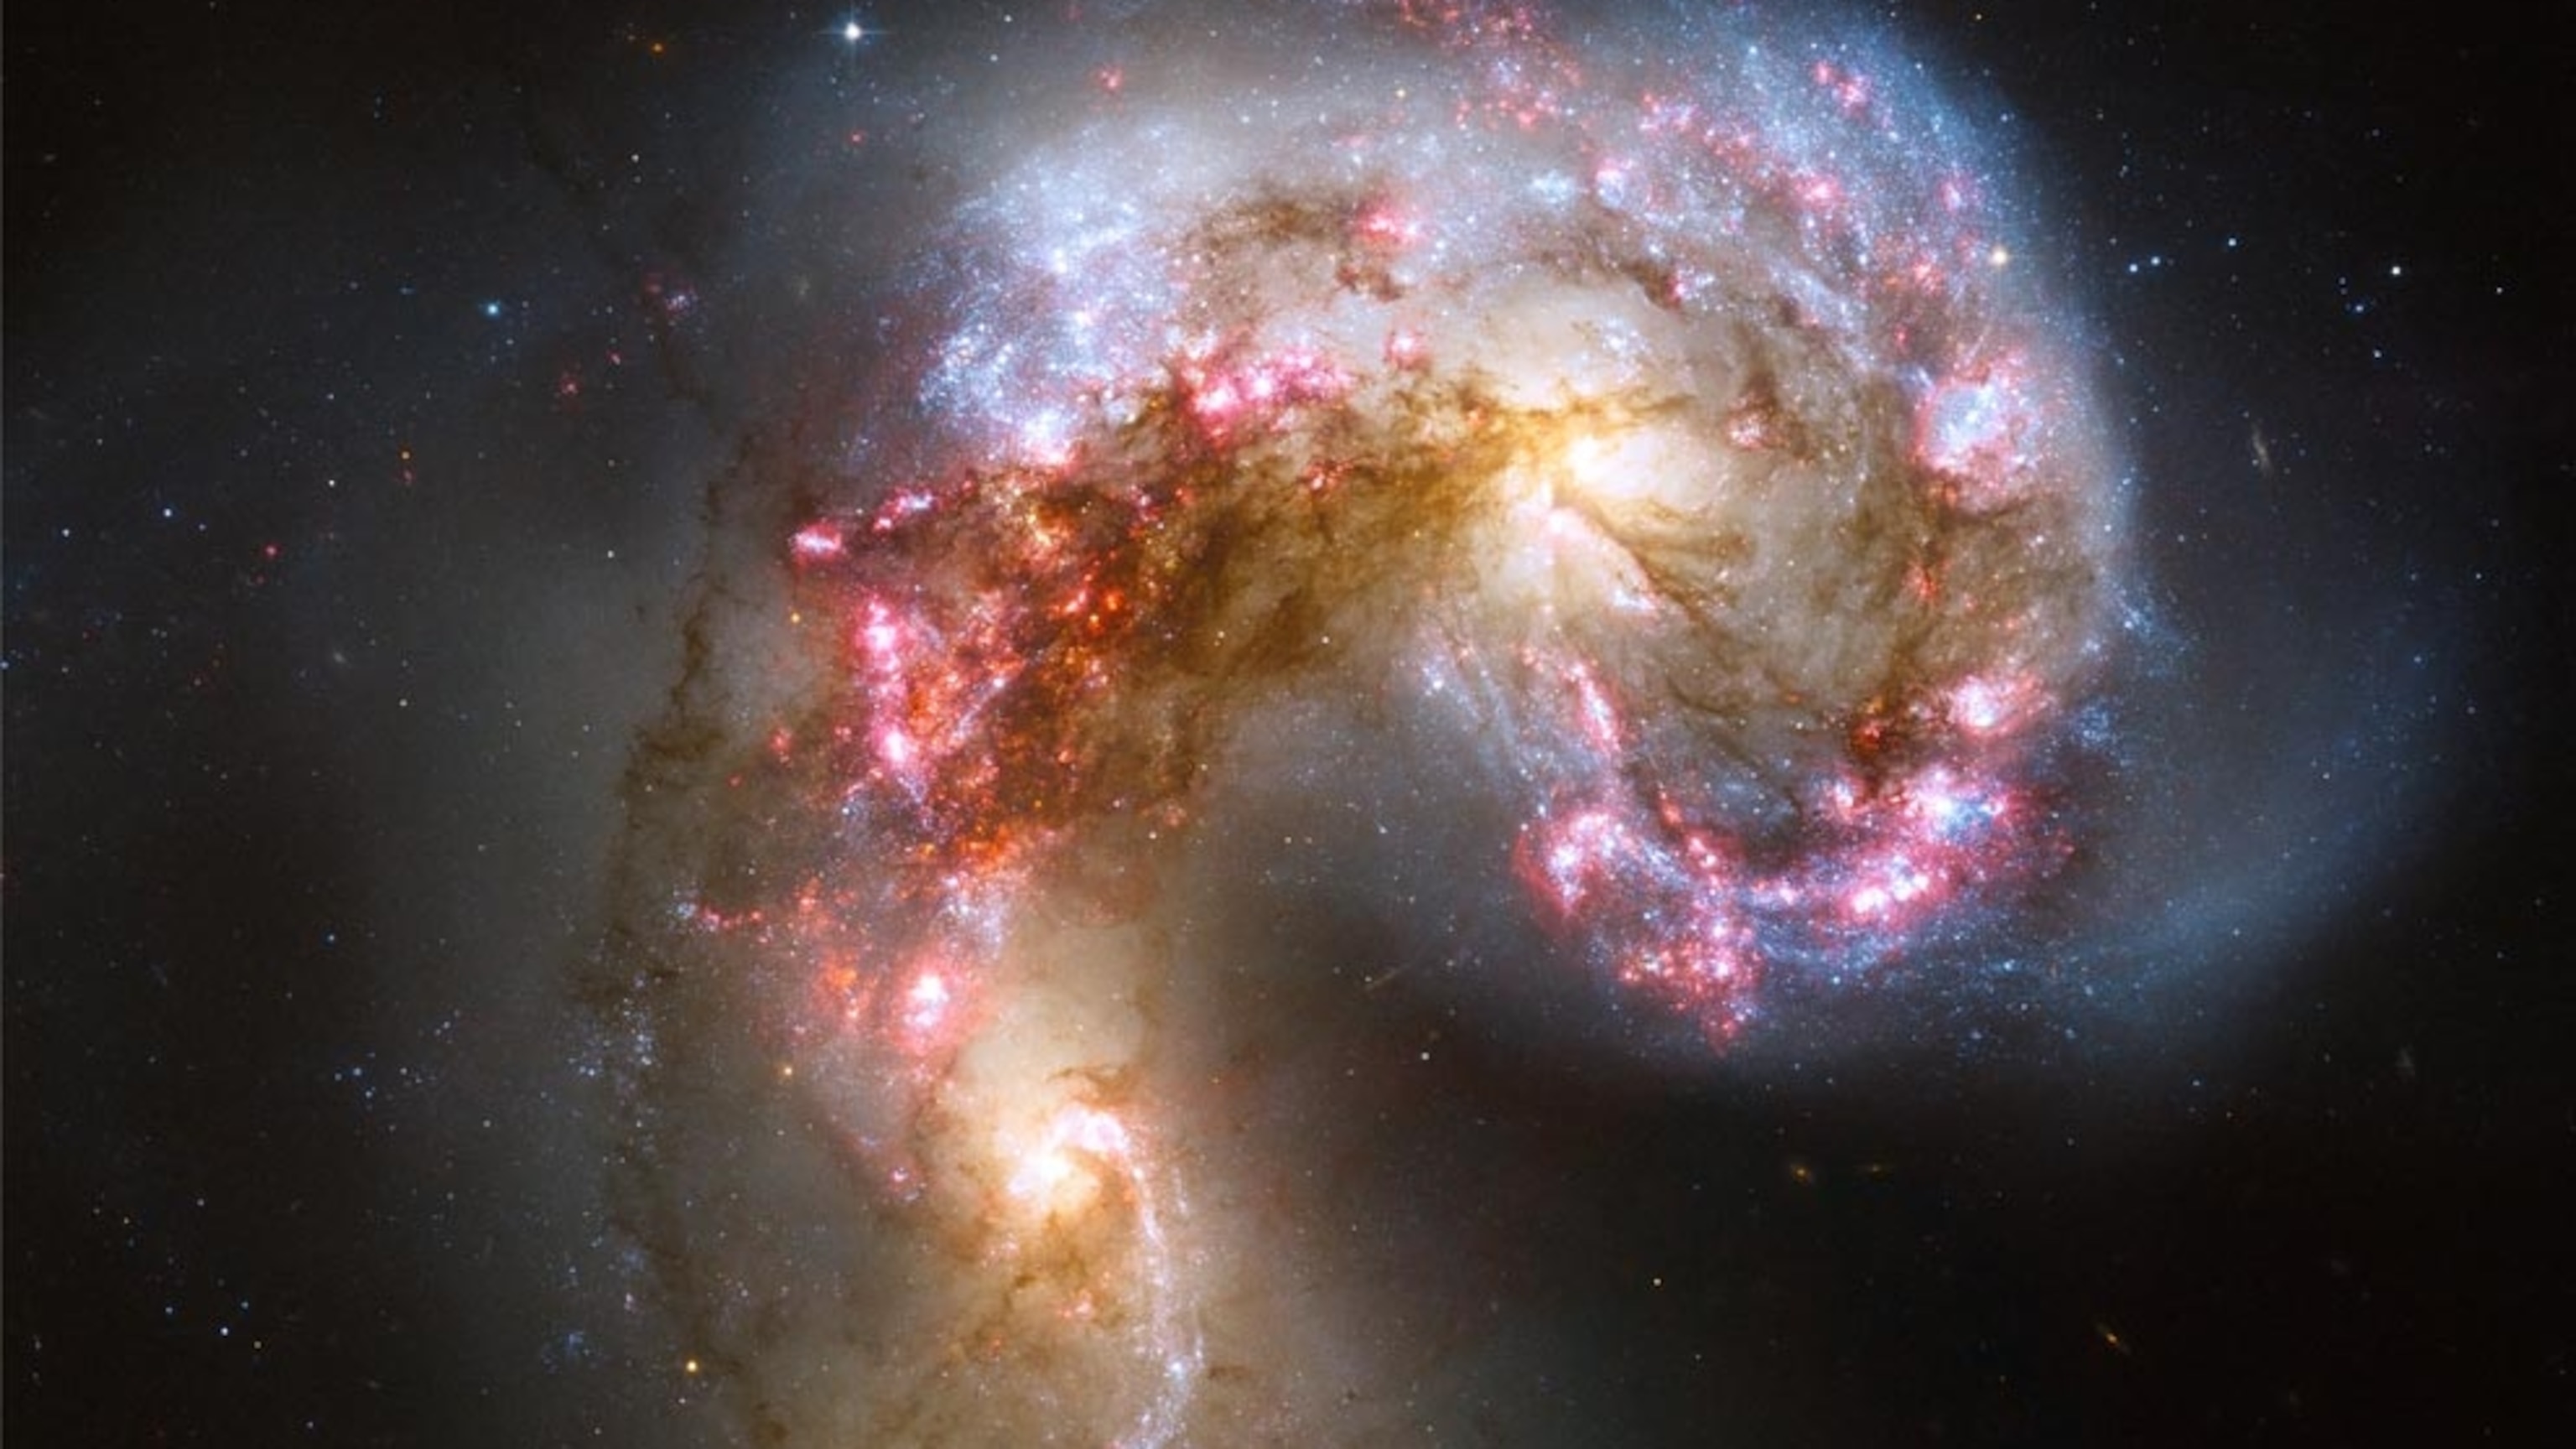 Galaxies—facts and information